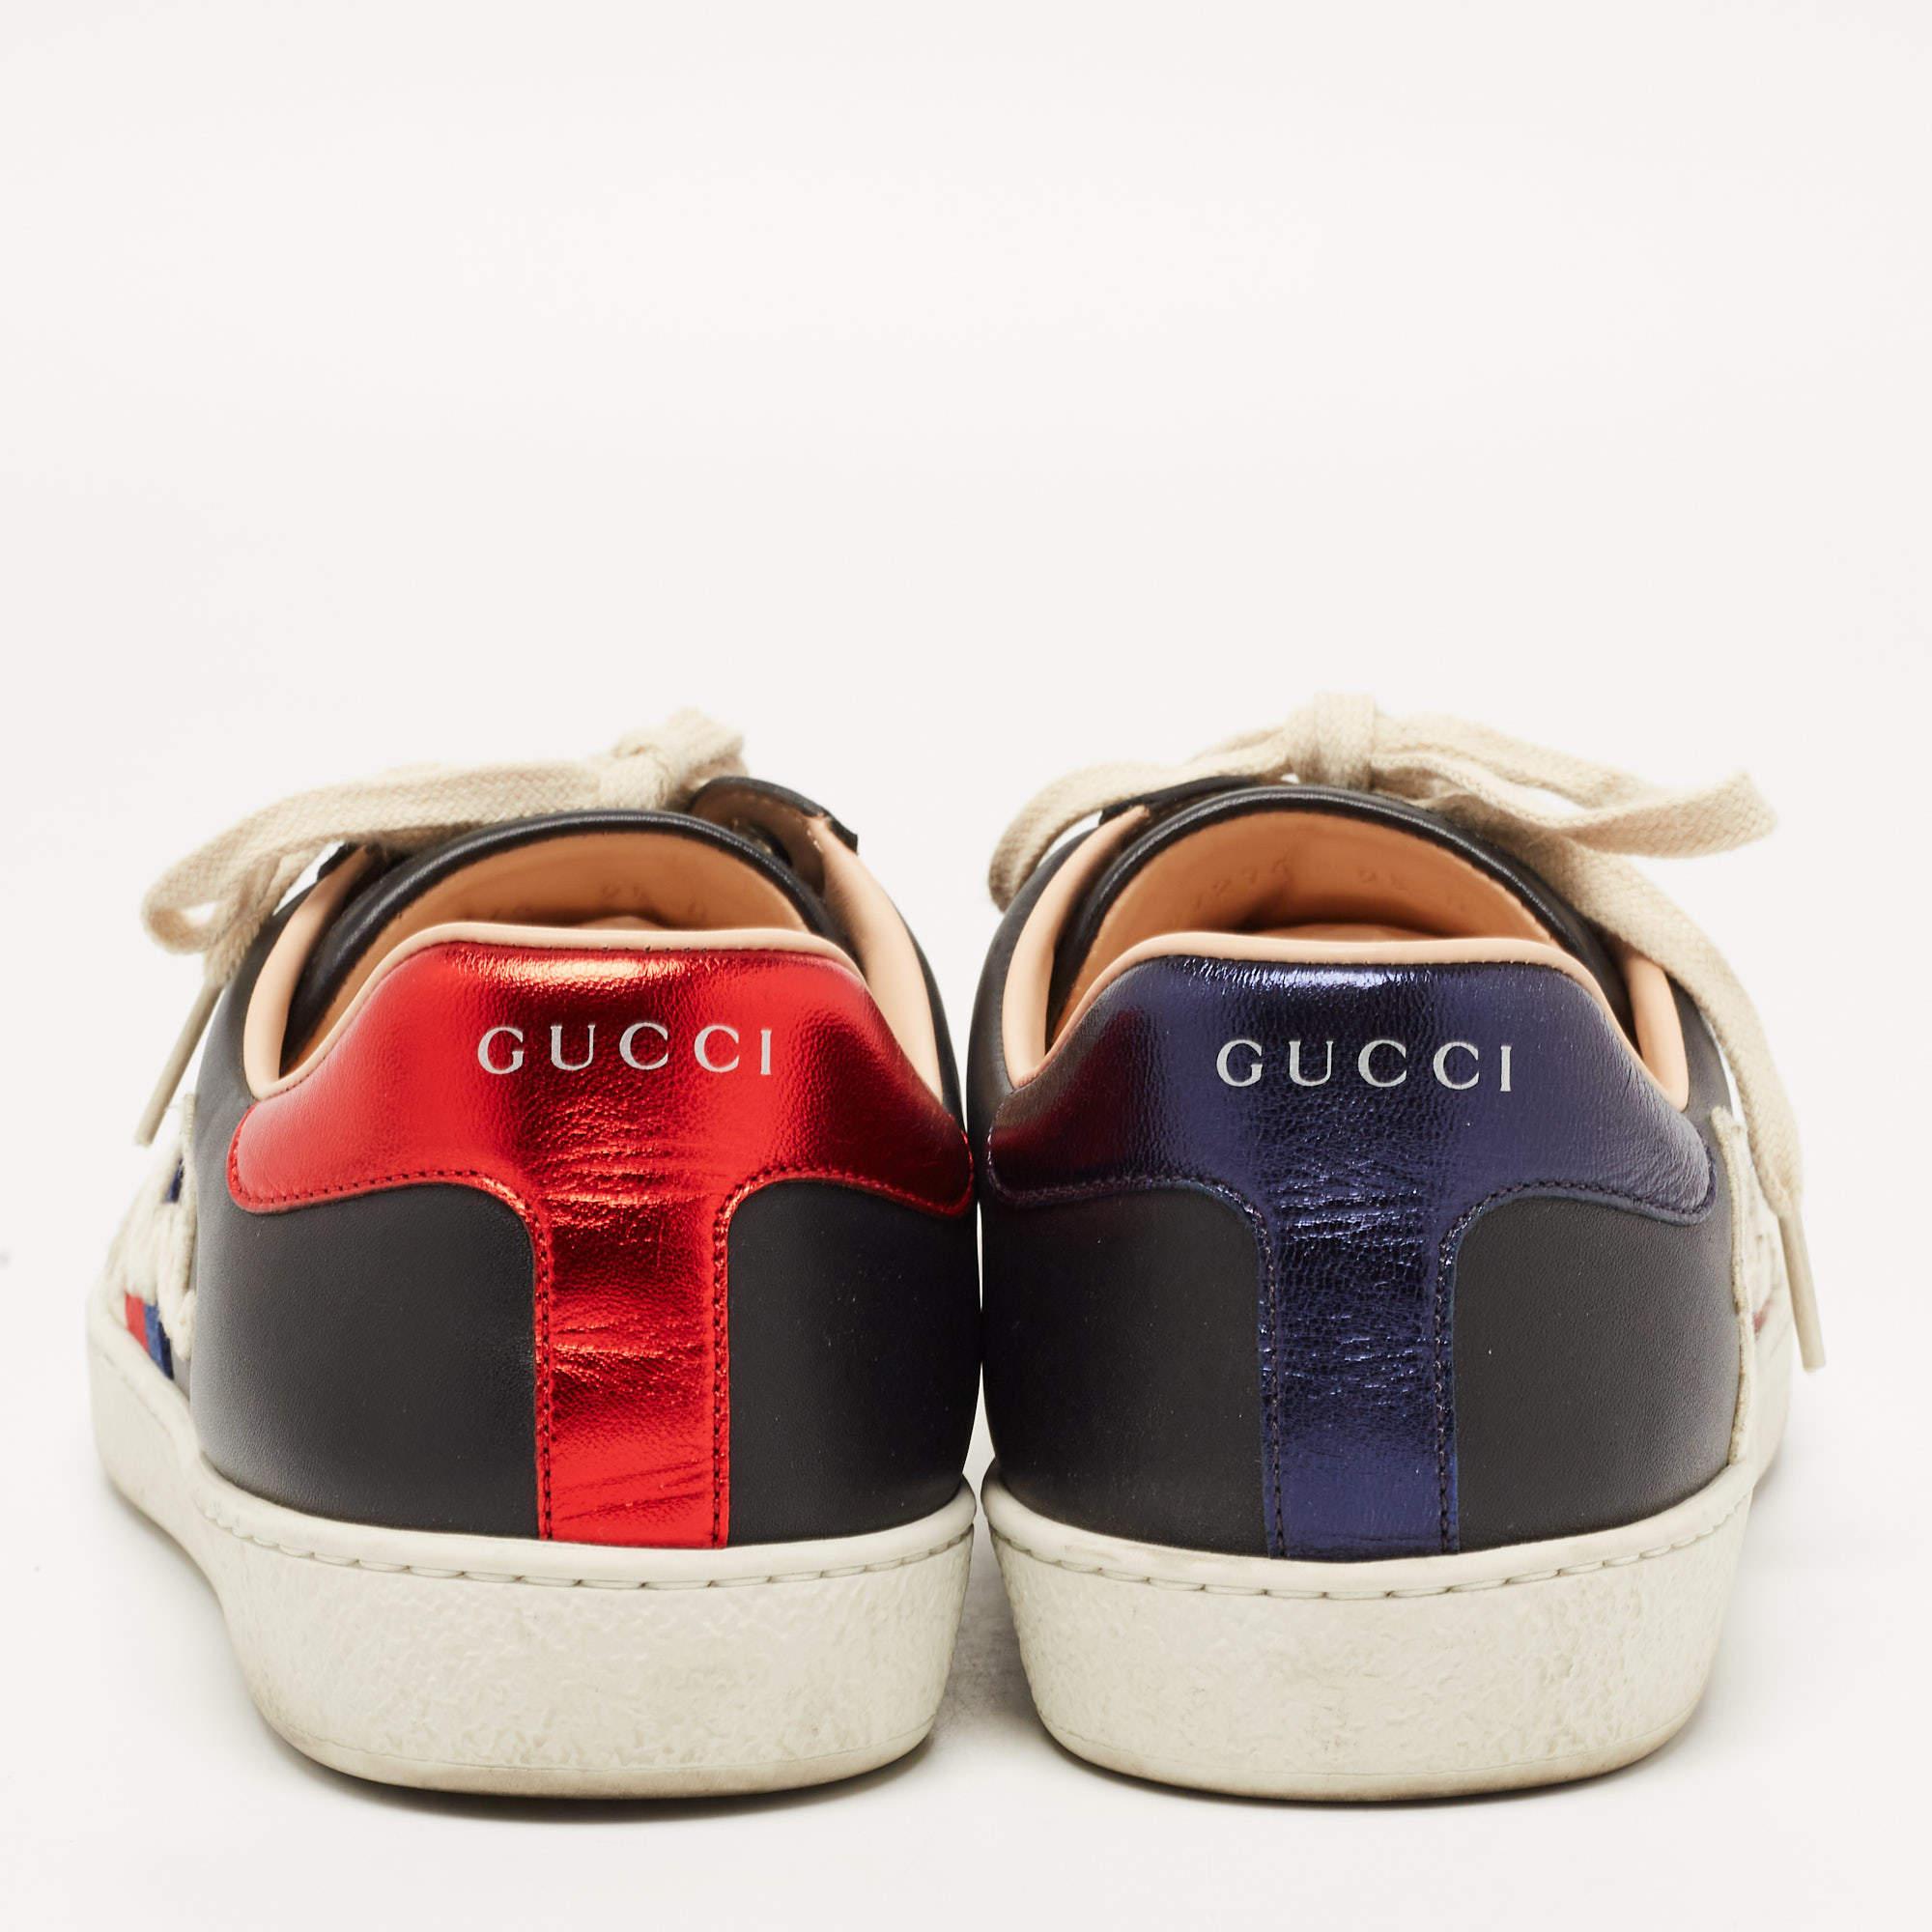 gucci blind for love sneakers